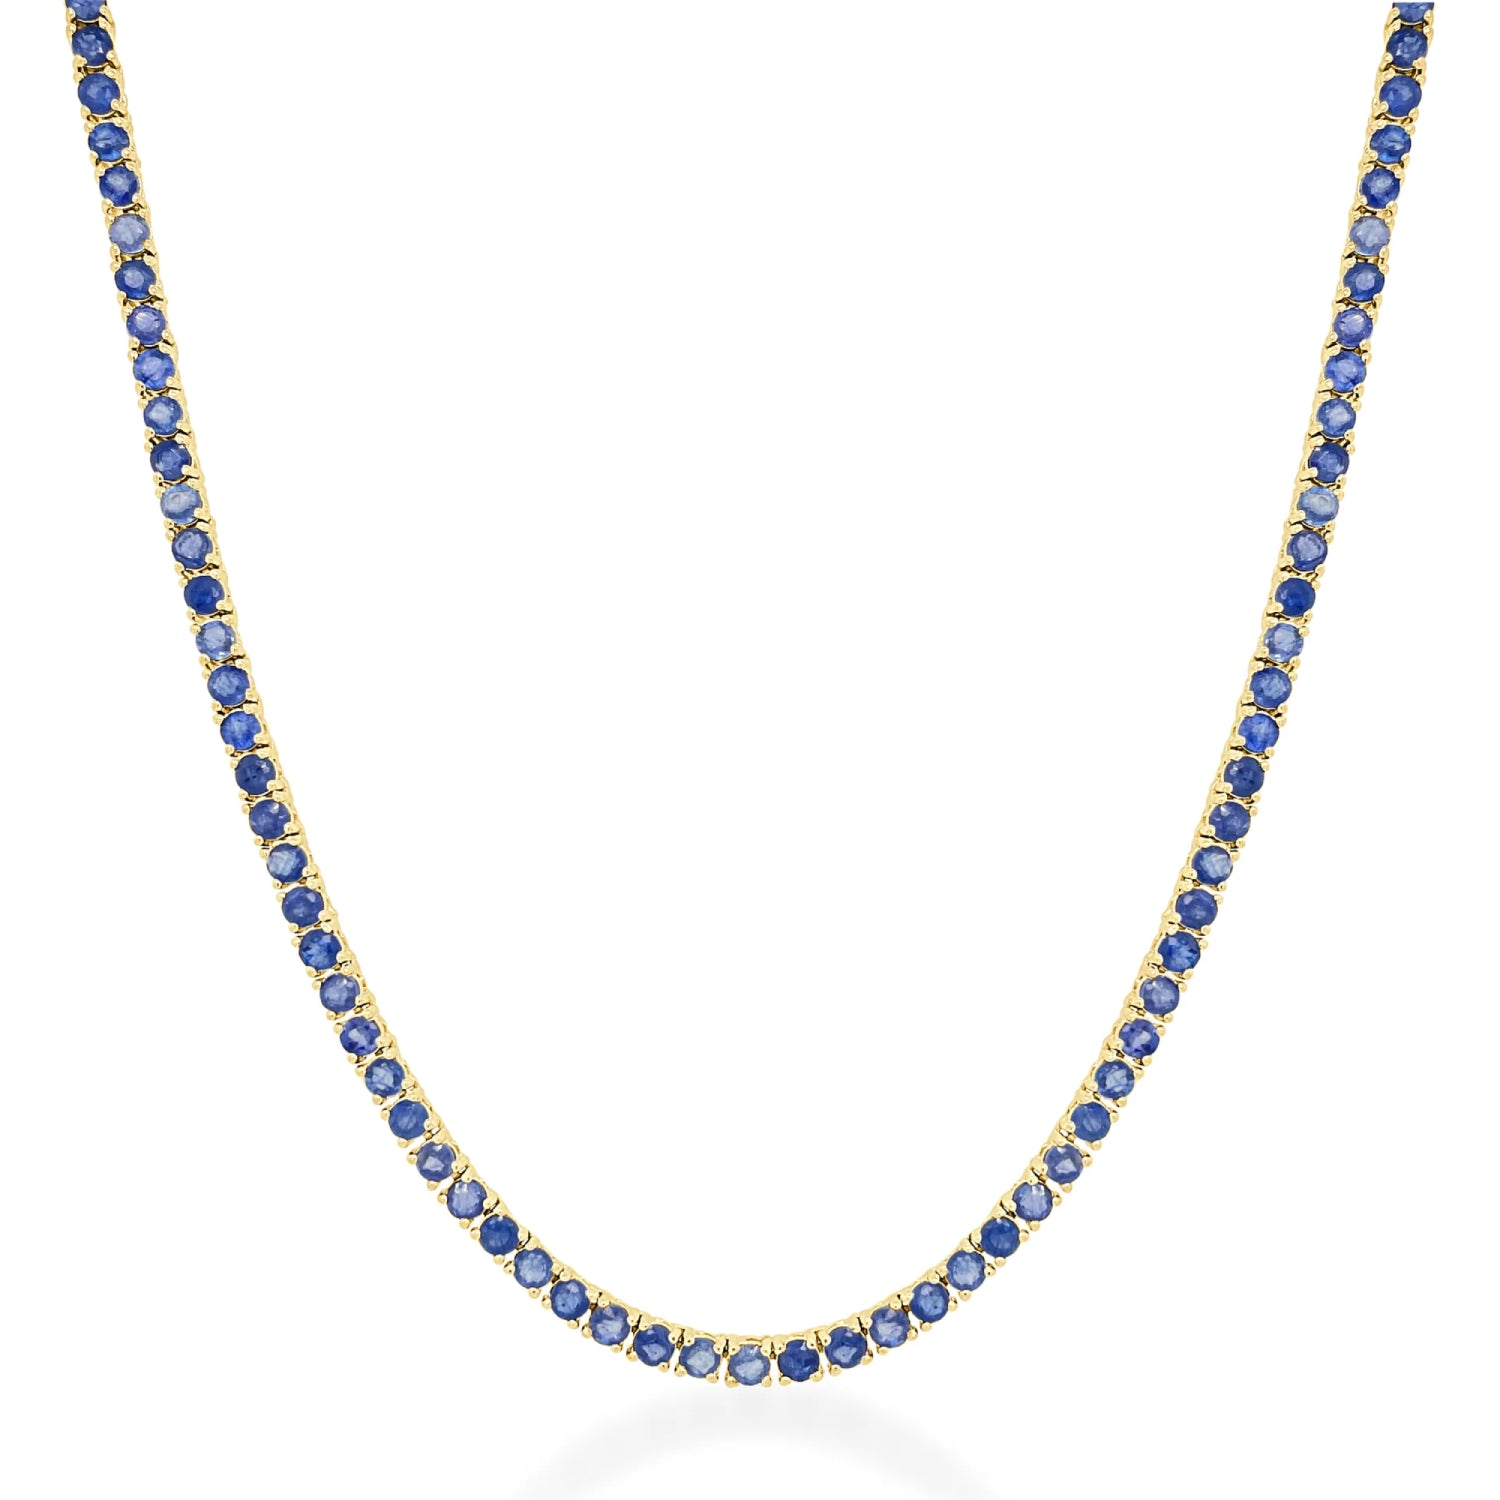 Round Cut Blue Sapphire Tennis Necklace in Yellow Gold